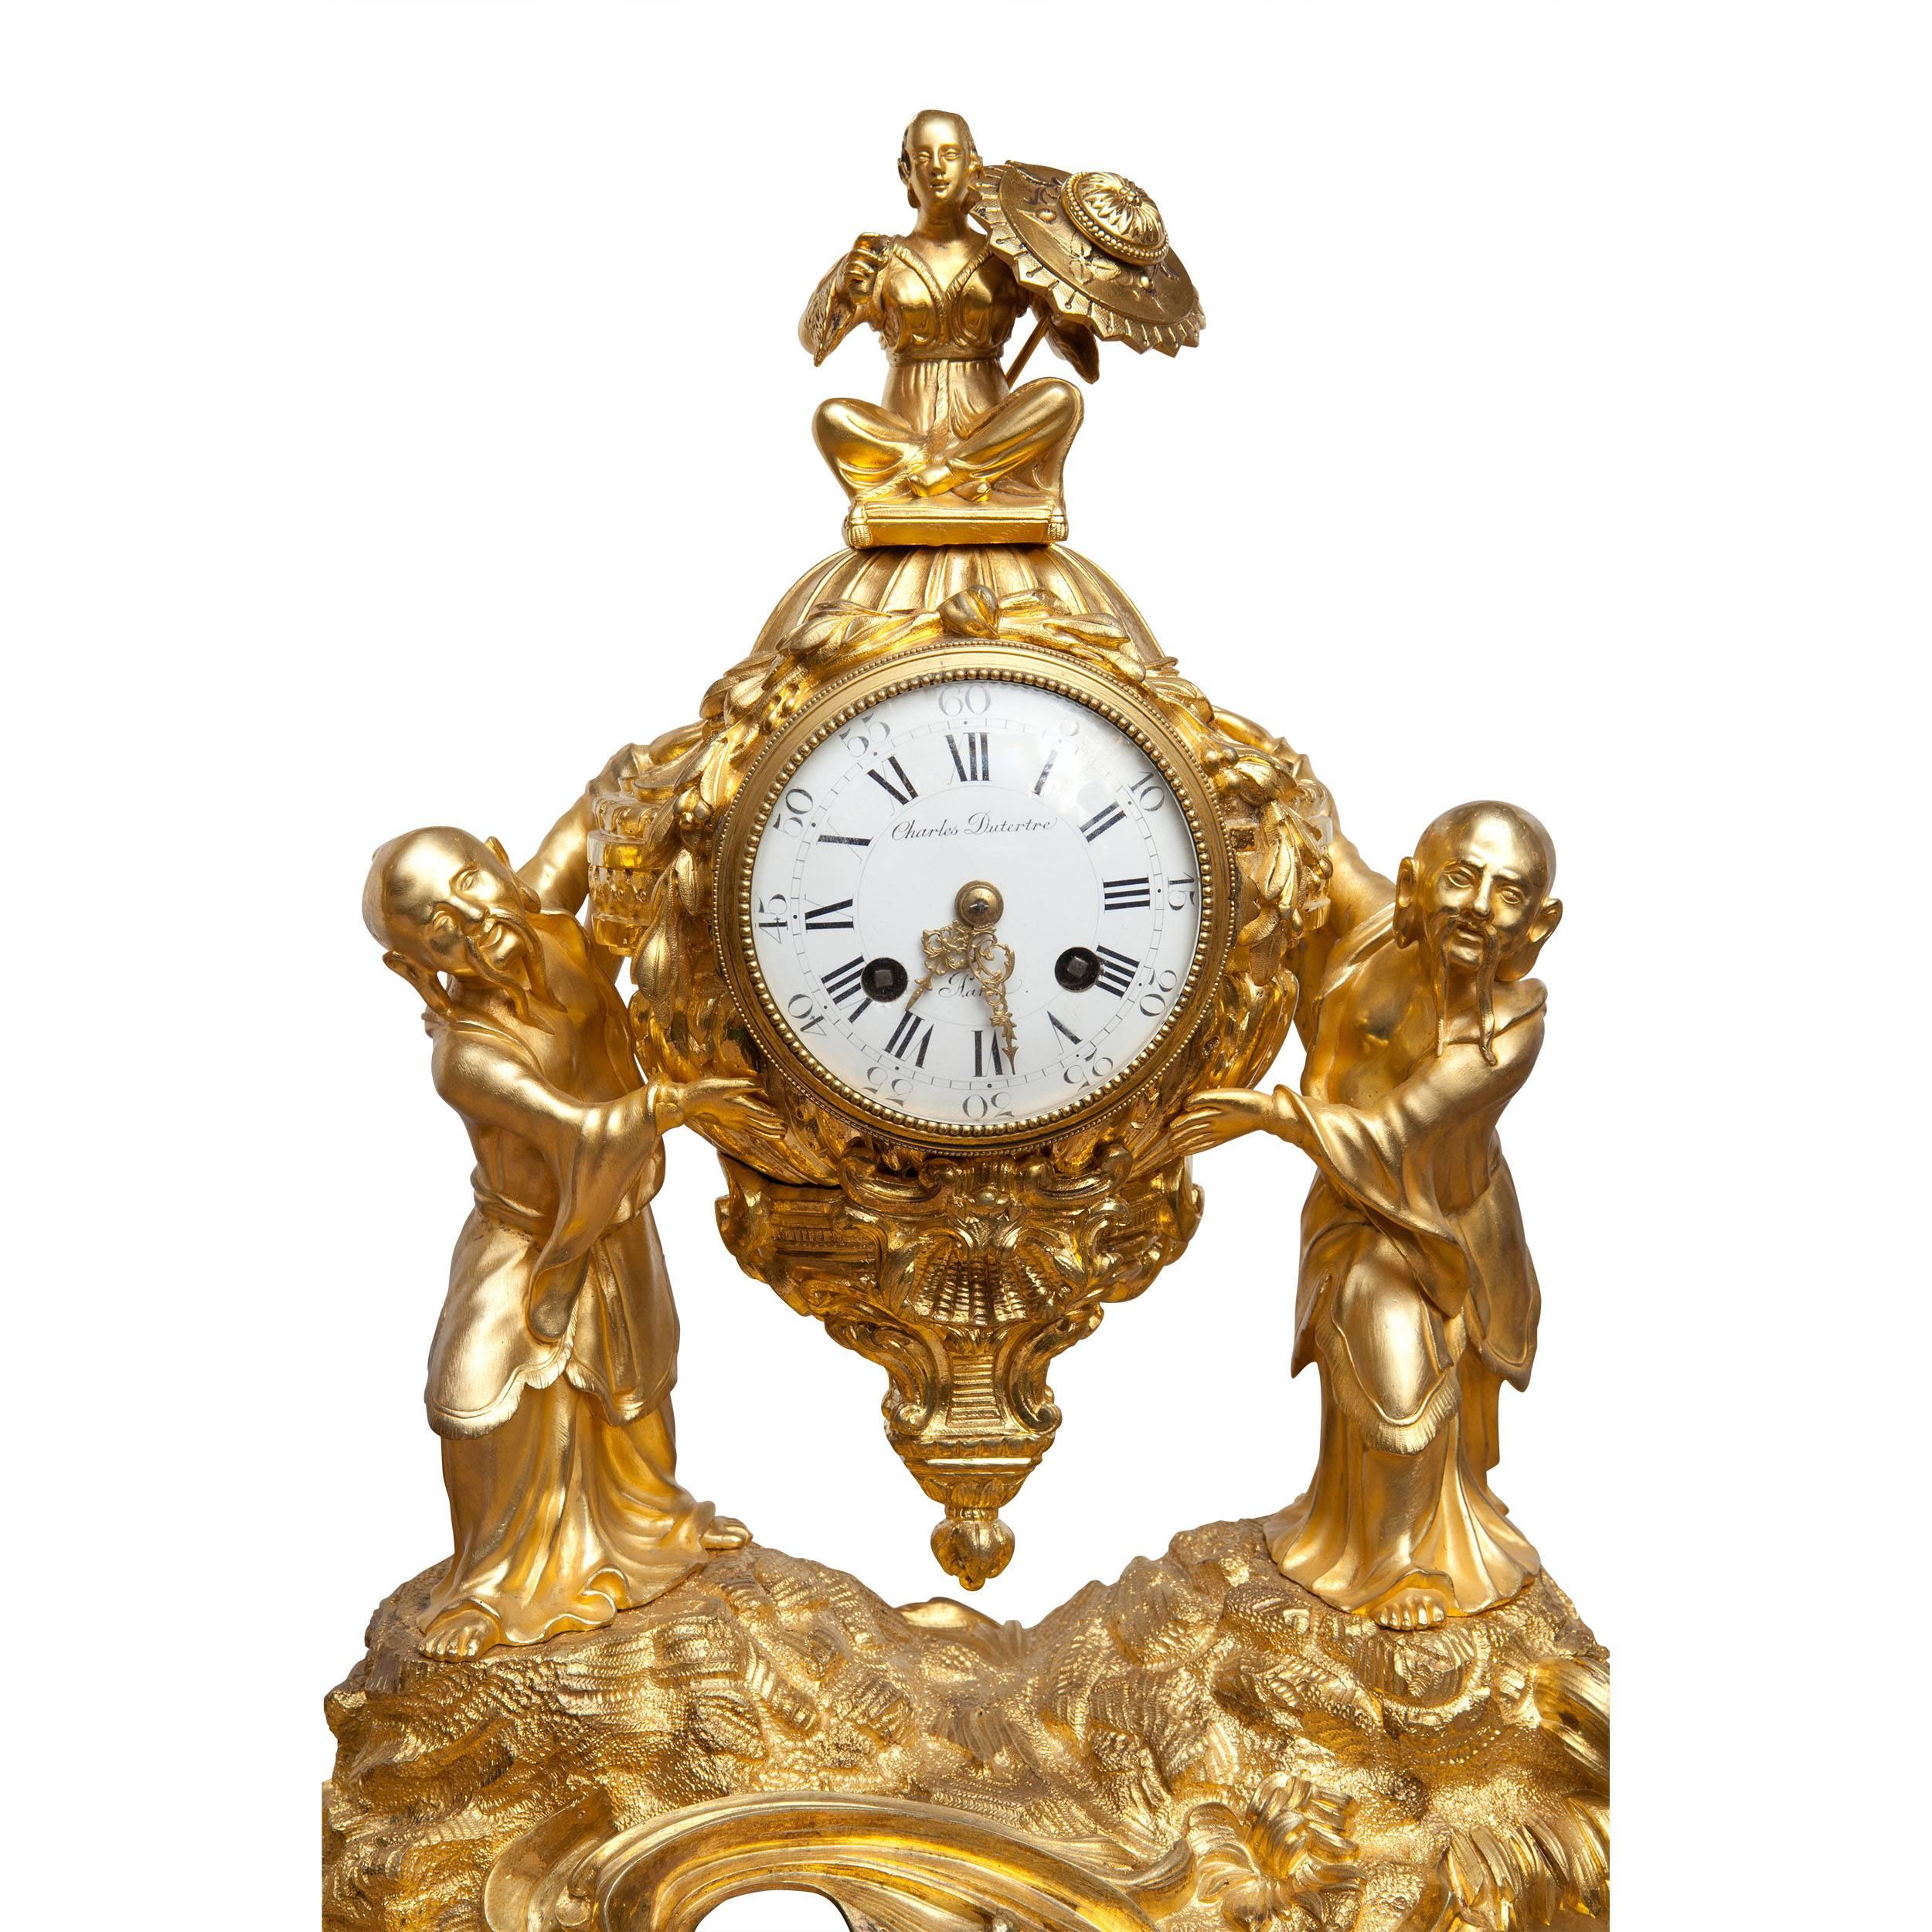 A fine chinoiserie orientalist gilt ormolu three-piece Louis XV 18th century clock garniture, the central clock supported by Chinese men in robes standing on a rocky base, the clock flanked by two gilt ormolu candelabra, again supported by Chinese